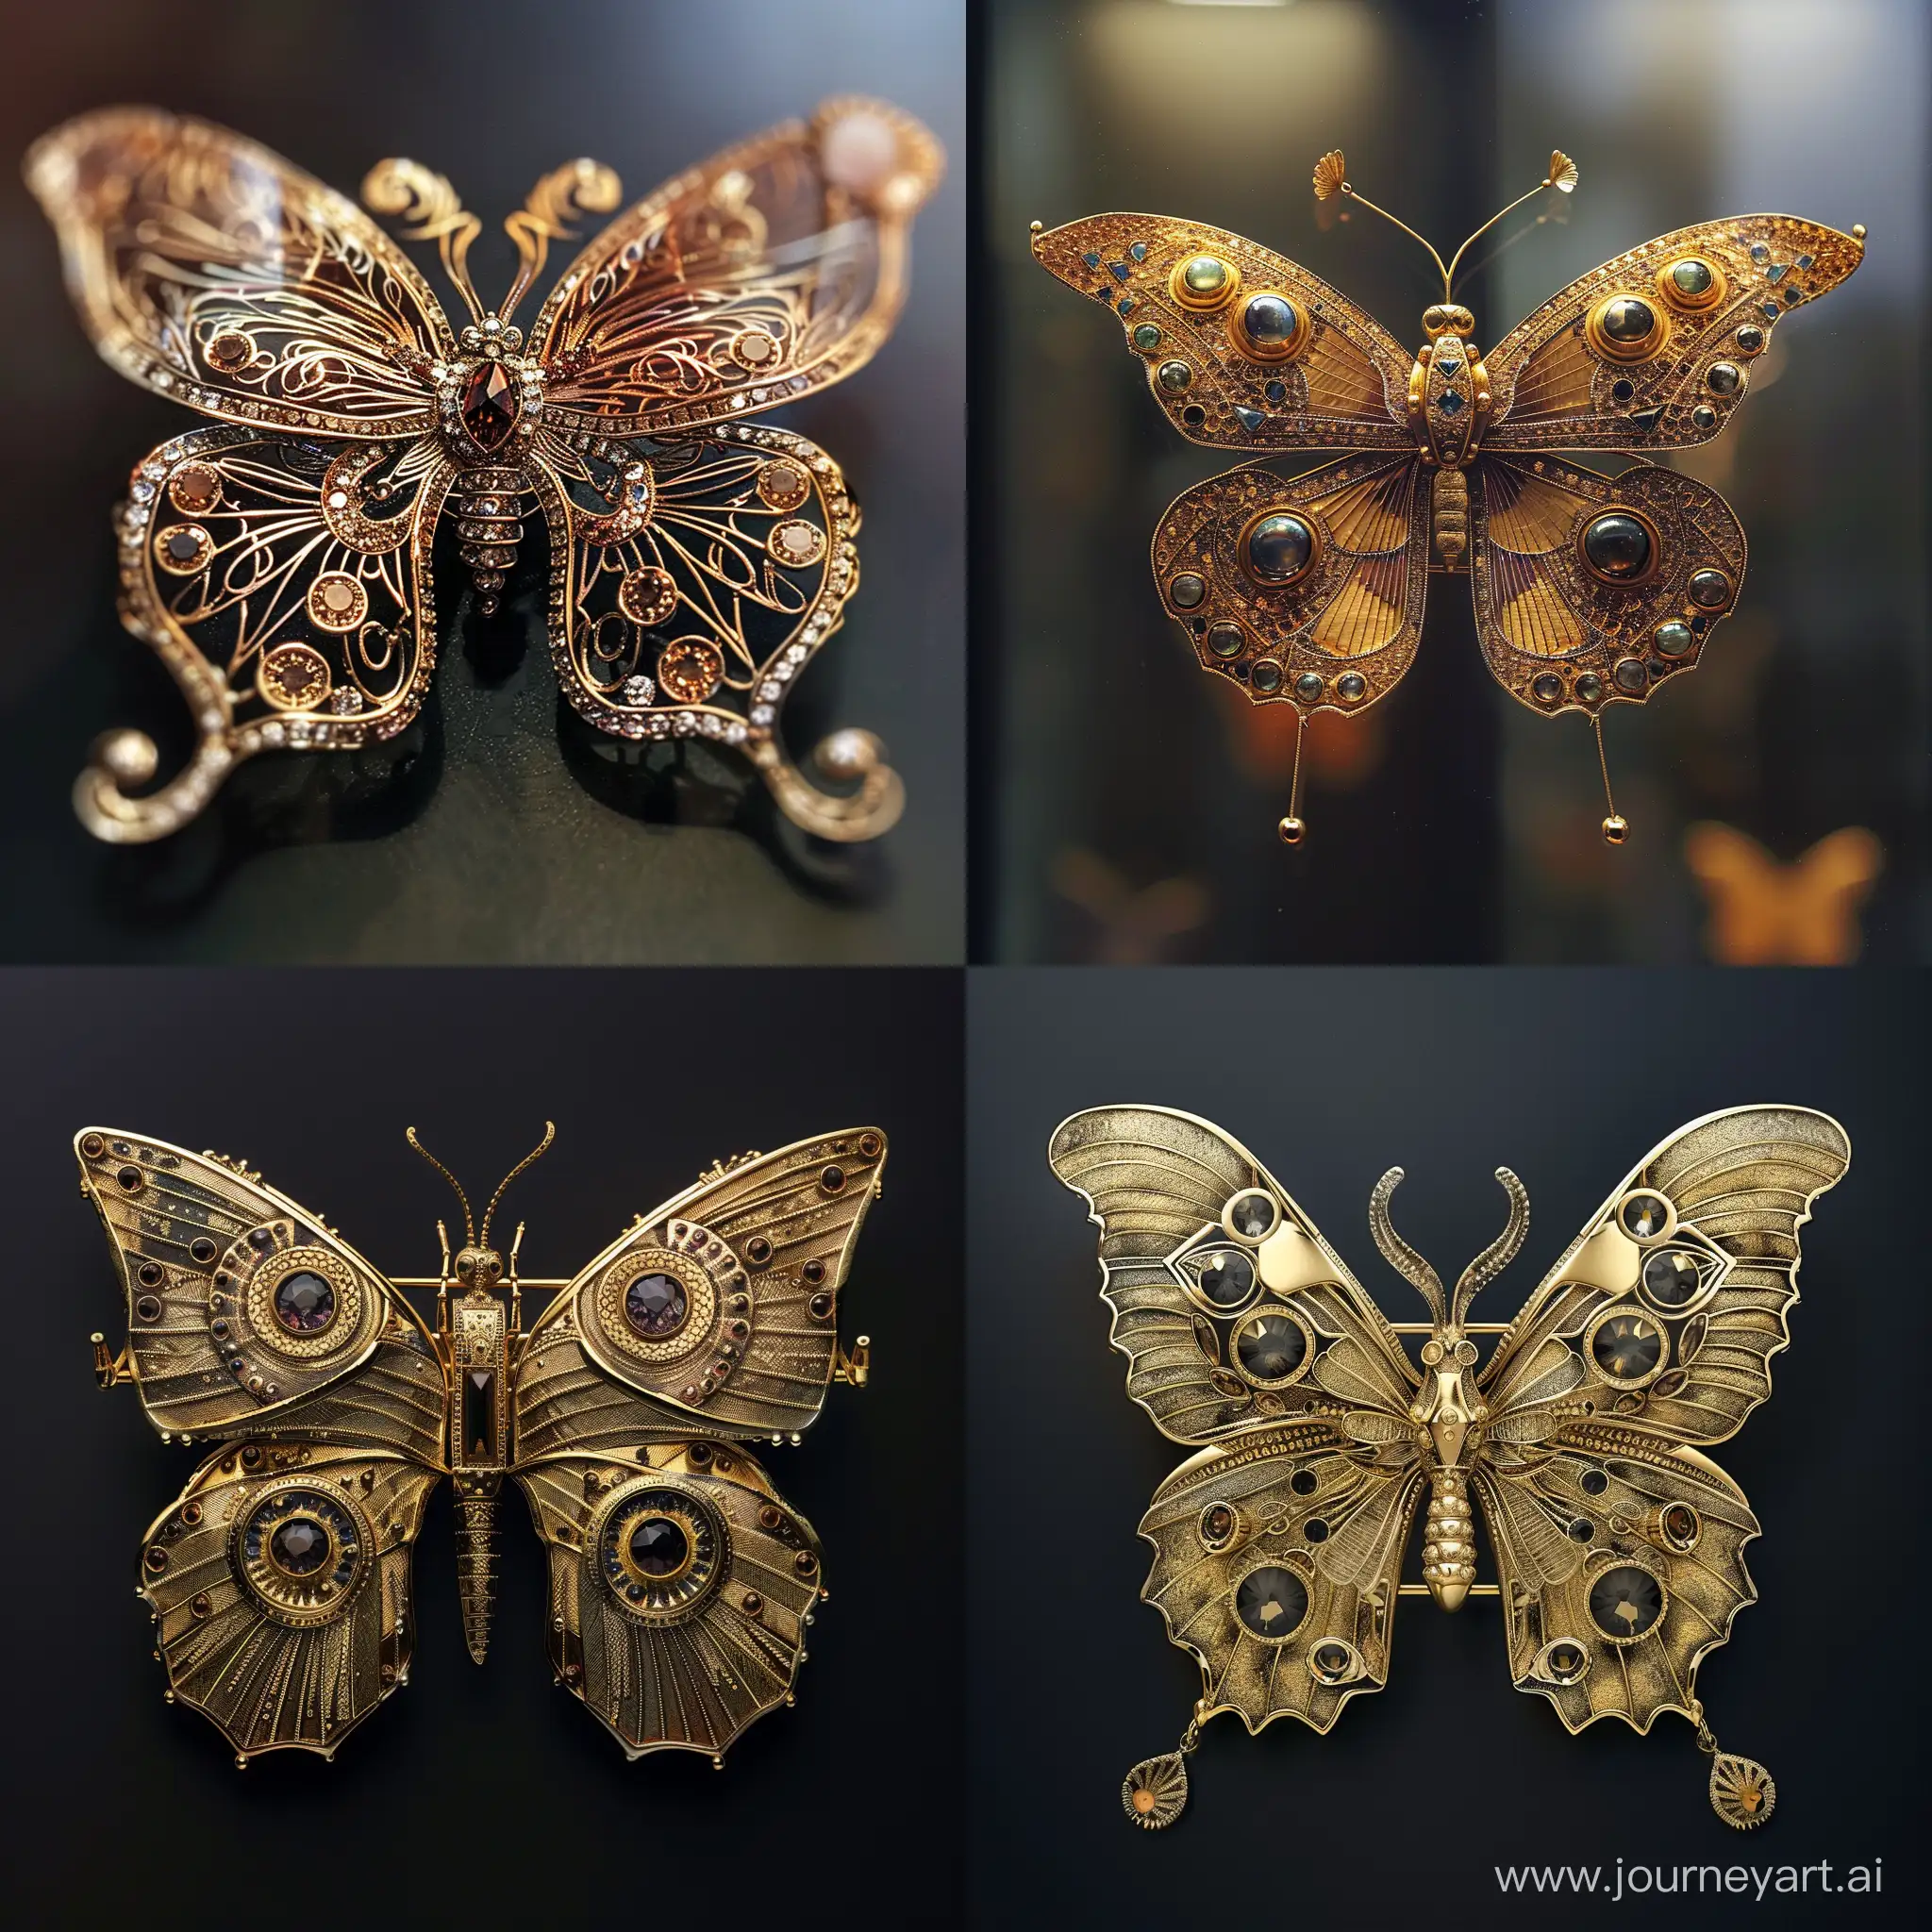 Art-Deco-Butterfly-Brooch-Exquisite-Gold-Jewelry-with-Precious-Stones